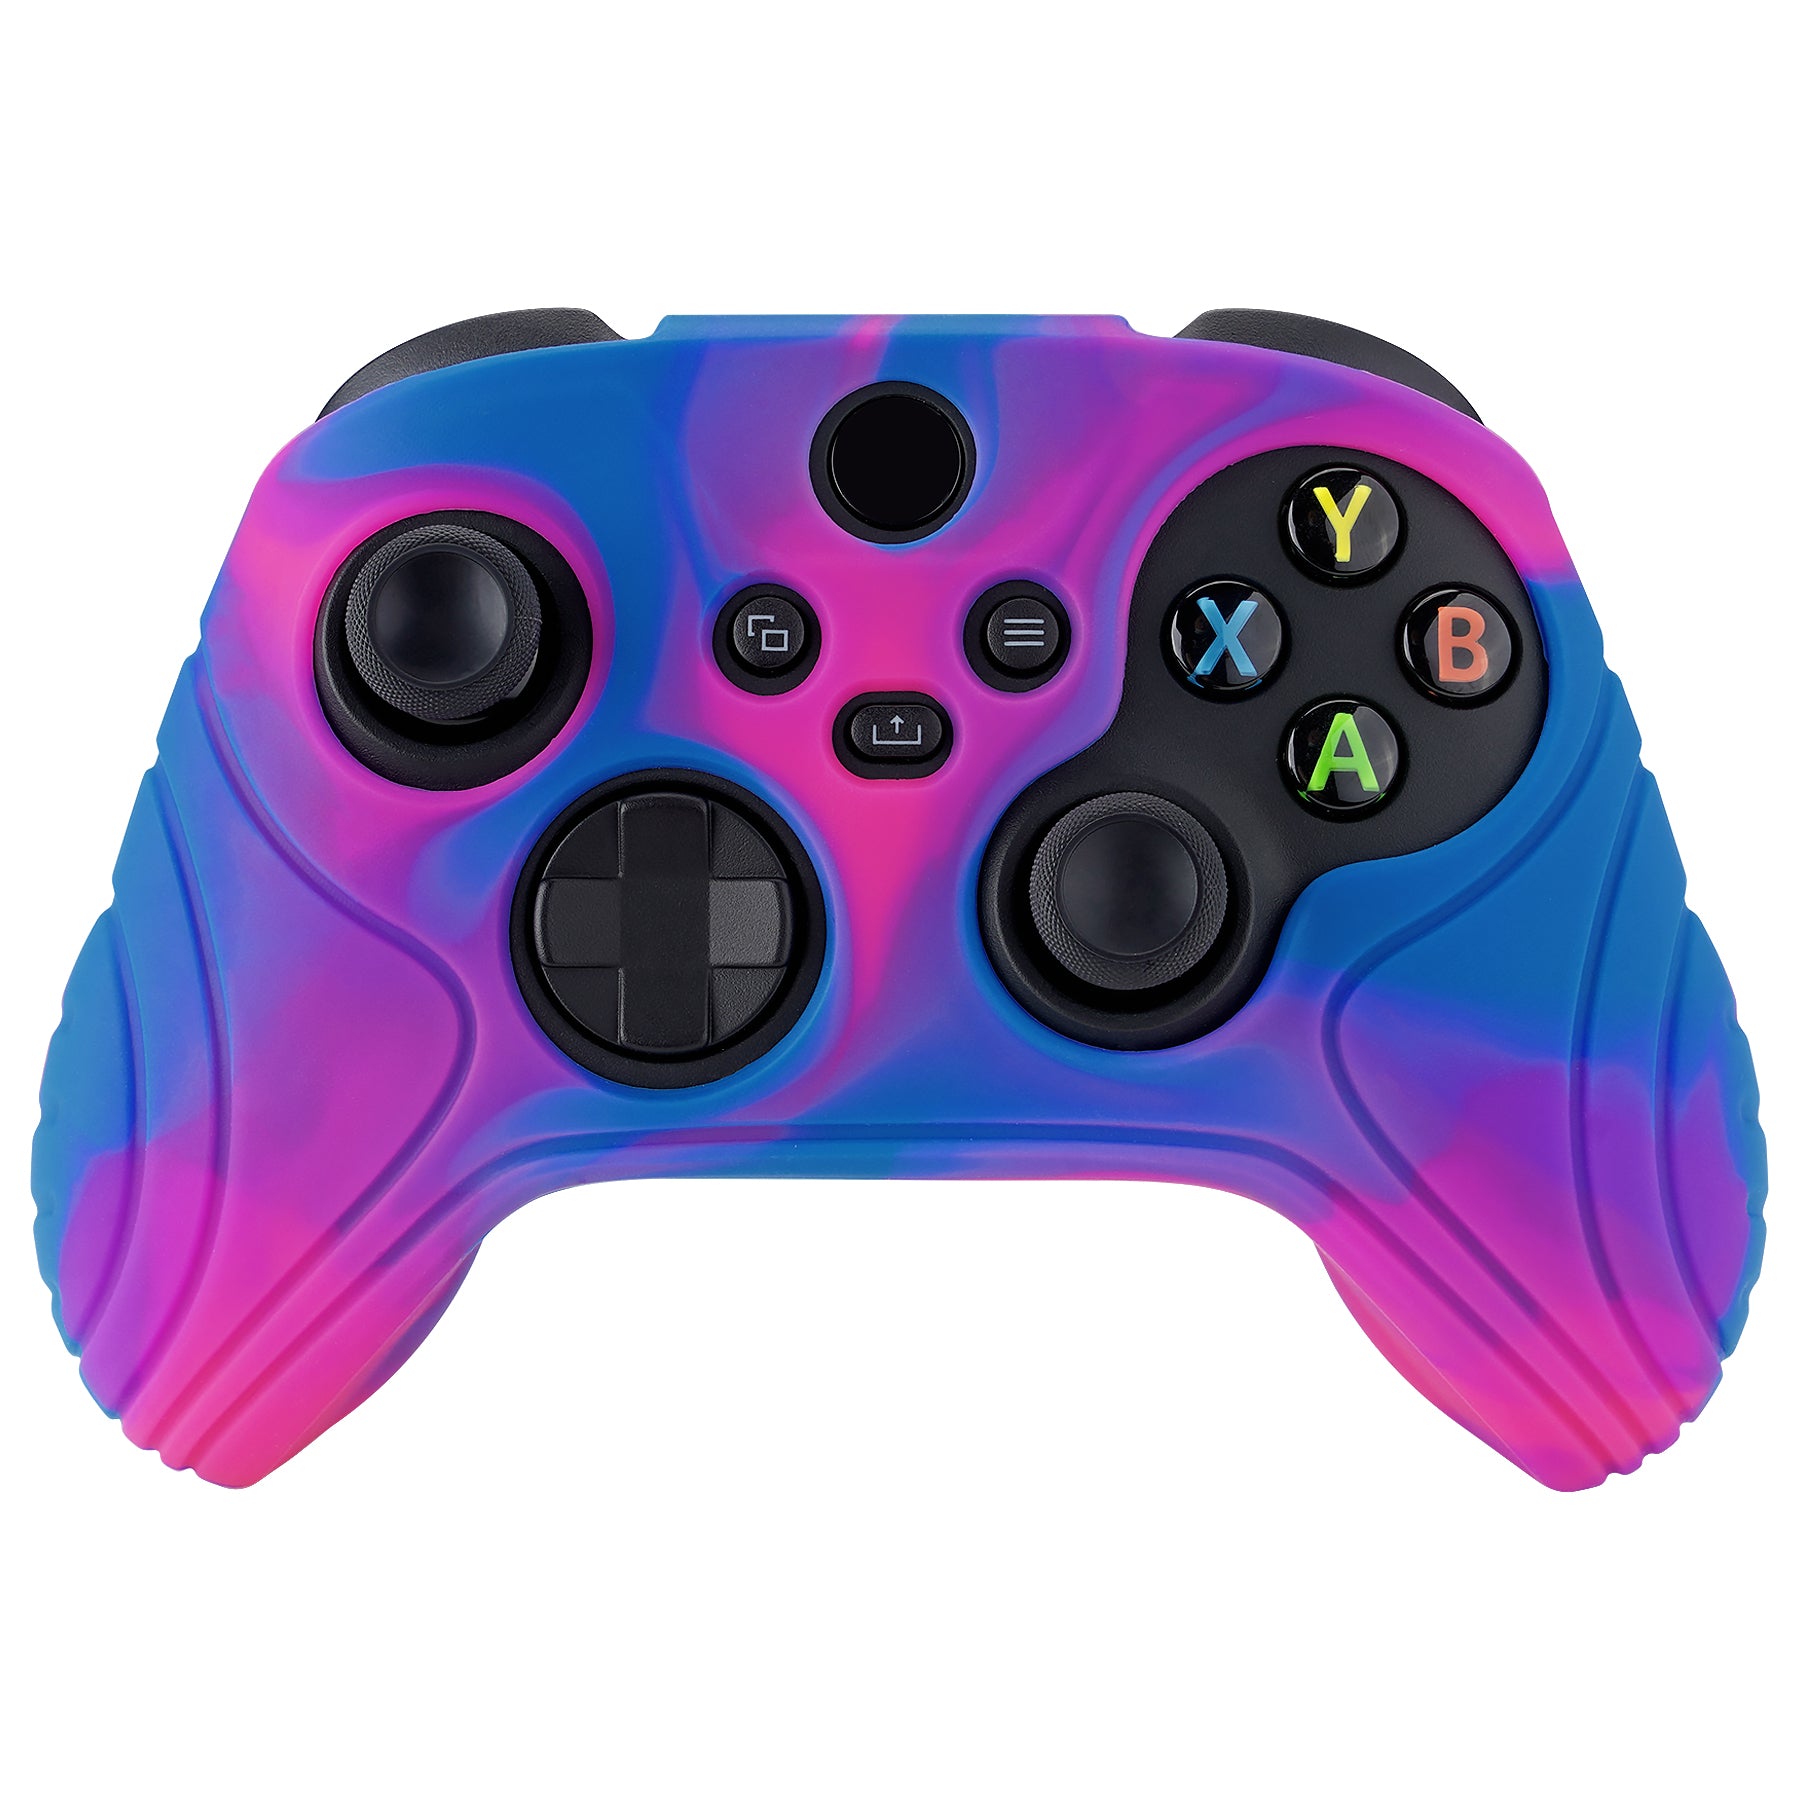 PlayVital Samurai Edition Pink & Purple & Blue Anti-slip Controller Grip Silicone Skin, Ergonomic Soft Rubber Protective Case Cover for Xbox Series S/X Controller with Black Thumb Stick Caps - WAX3015 PlayVital